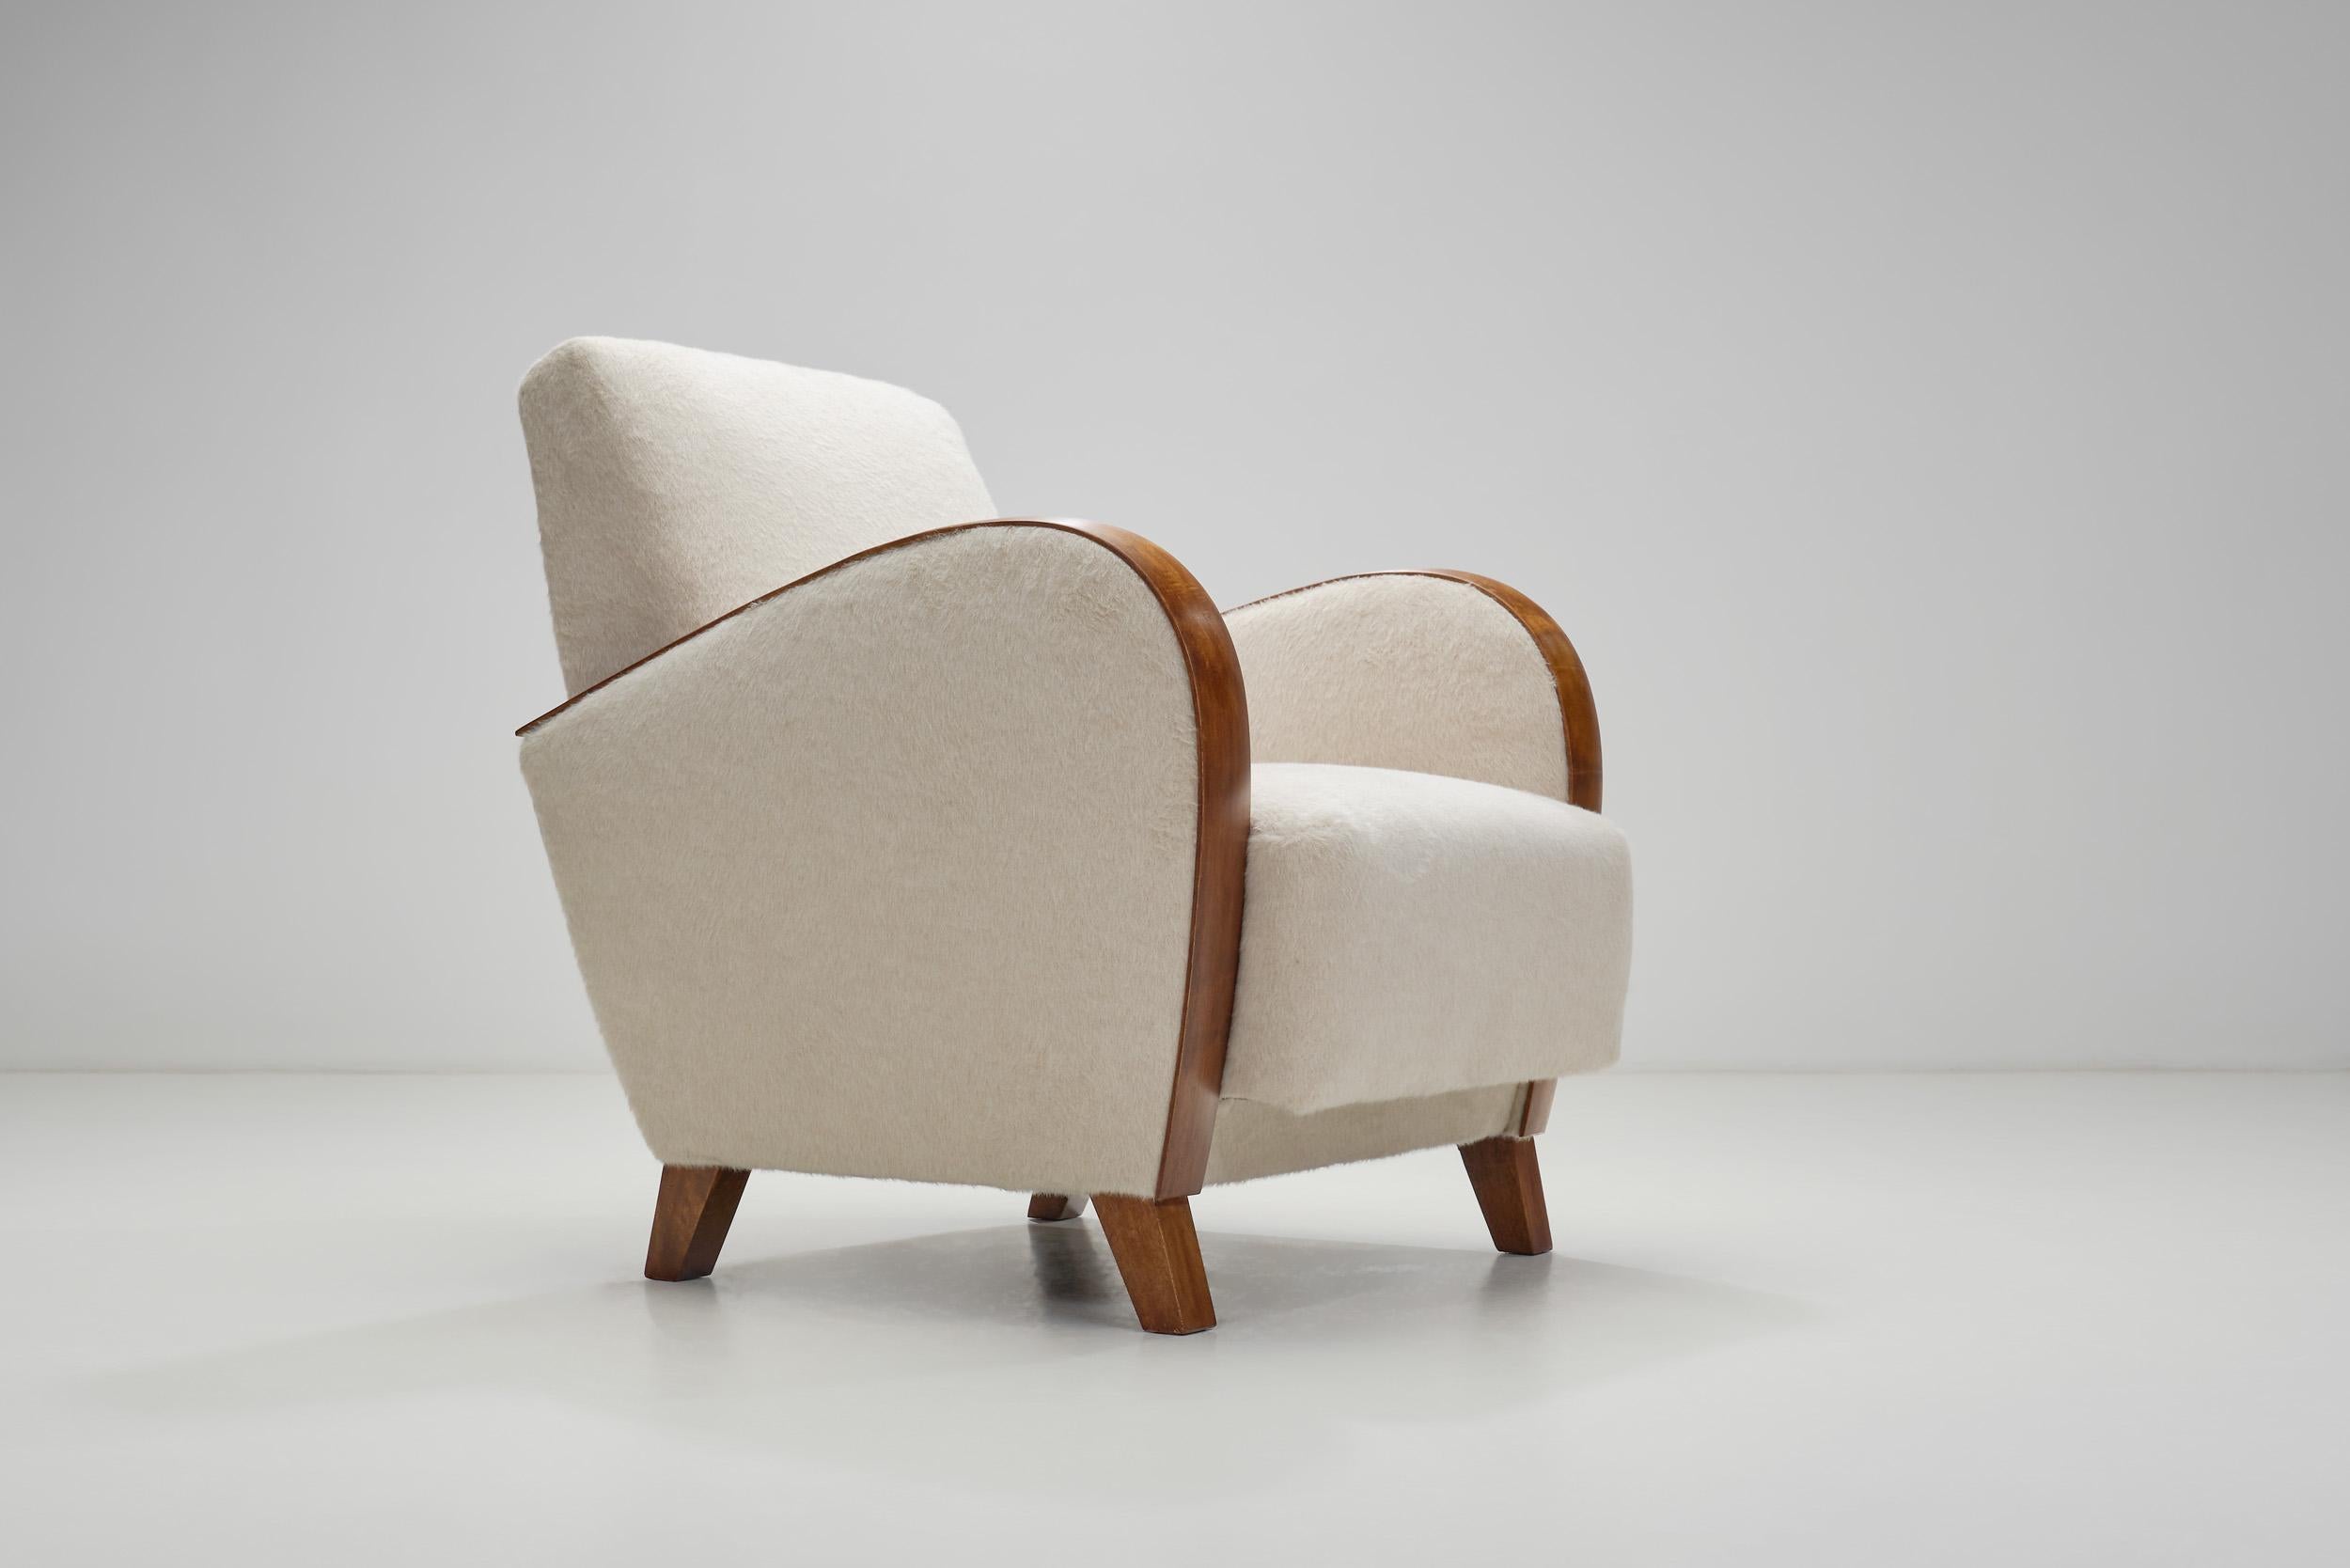 Fabric A Pair of Reupholstered Funkis Armchairs by Axel Einar Hjorth, Sweden 1930s.